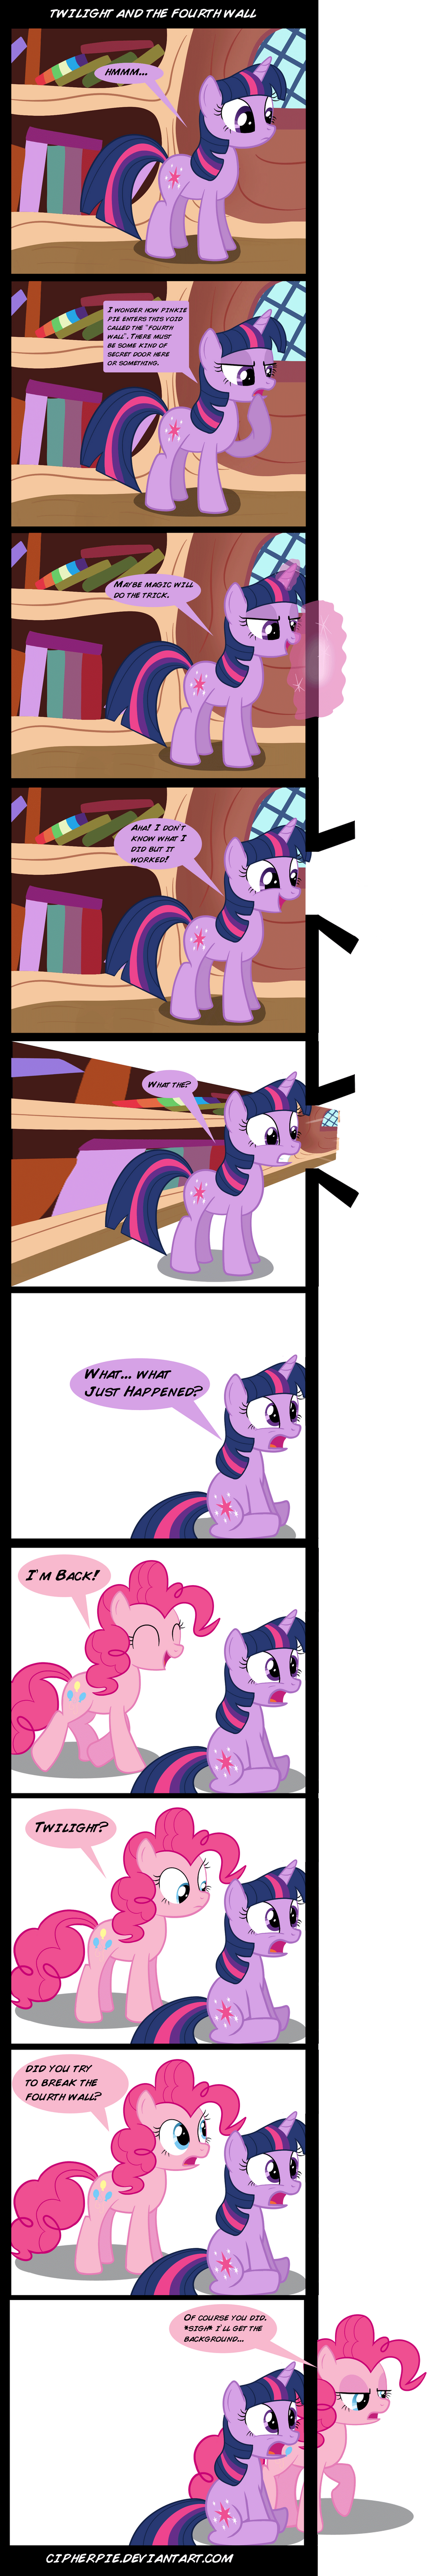 [Bild: twilight_and_the_fourth_wall_by_cipherpie-d4xlu3f.png]